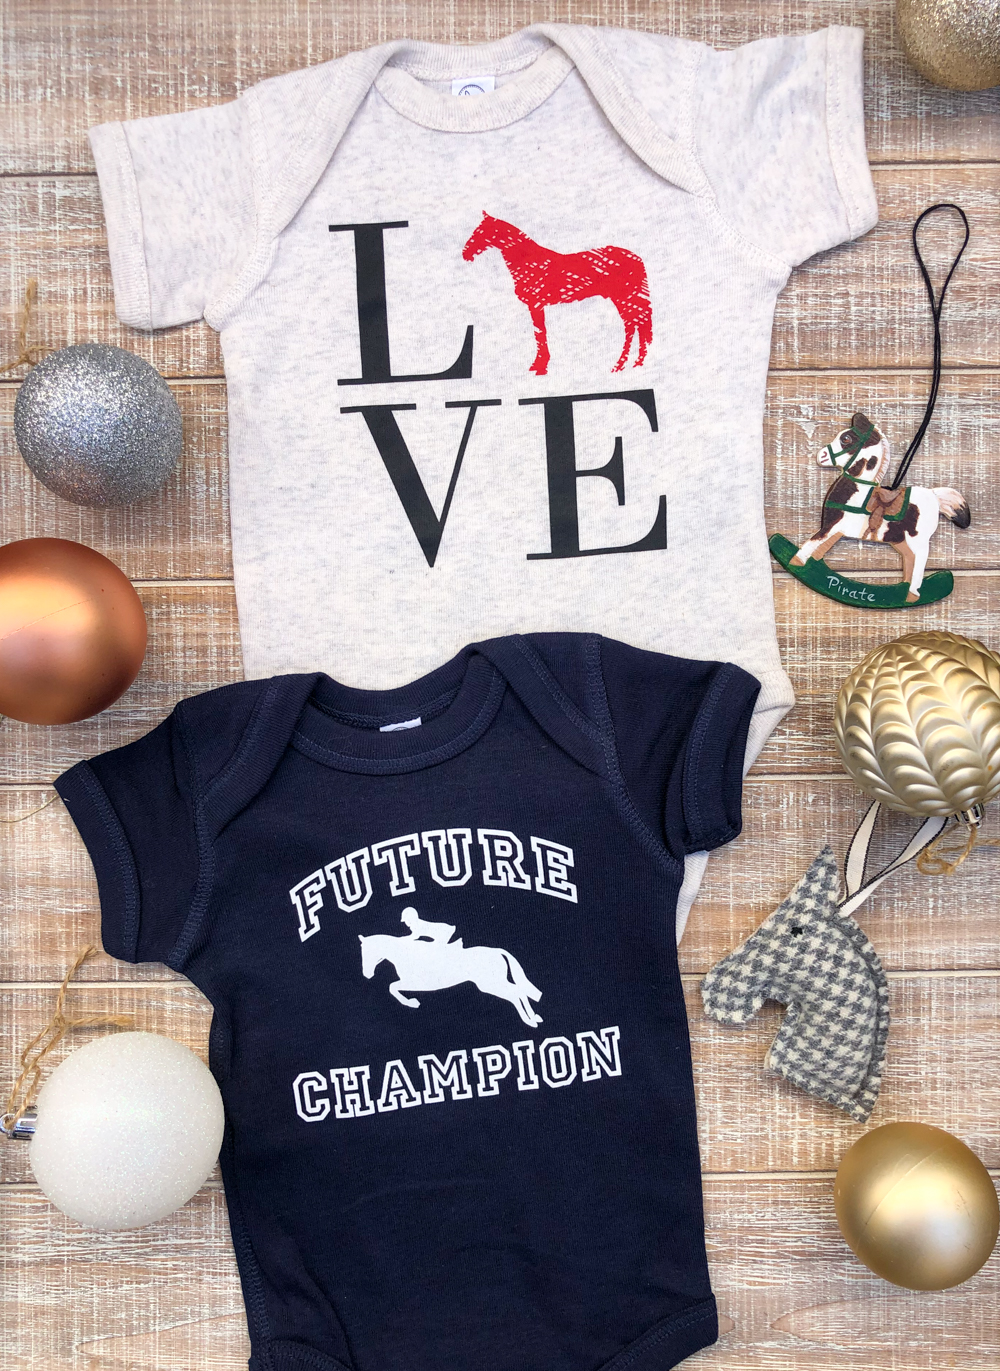 Baby clothes for the future equestrian